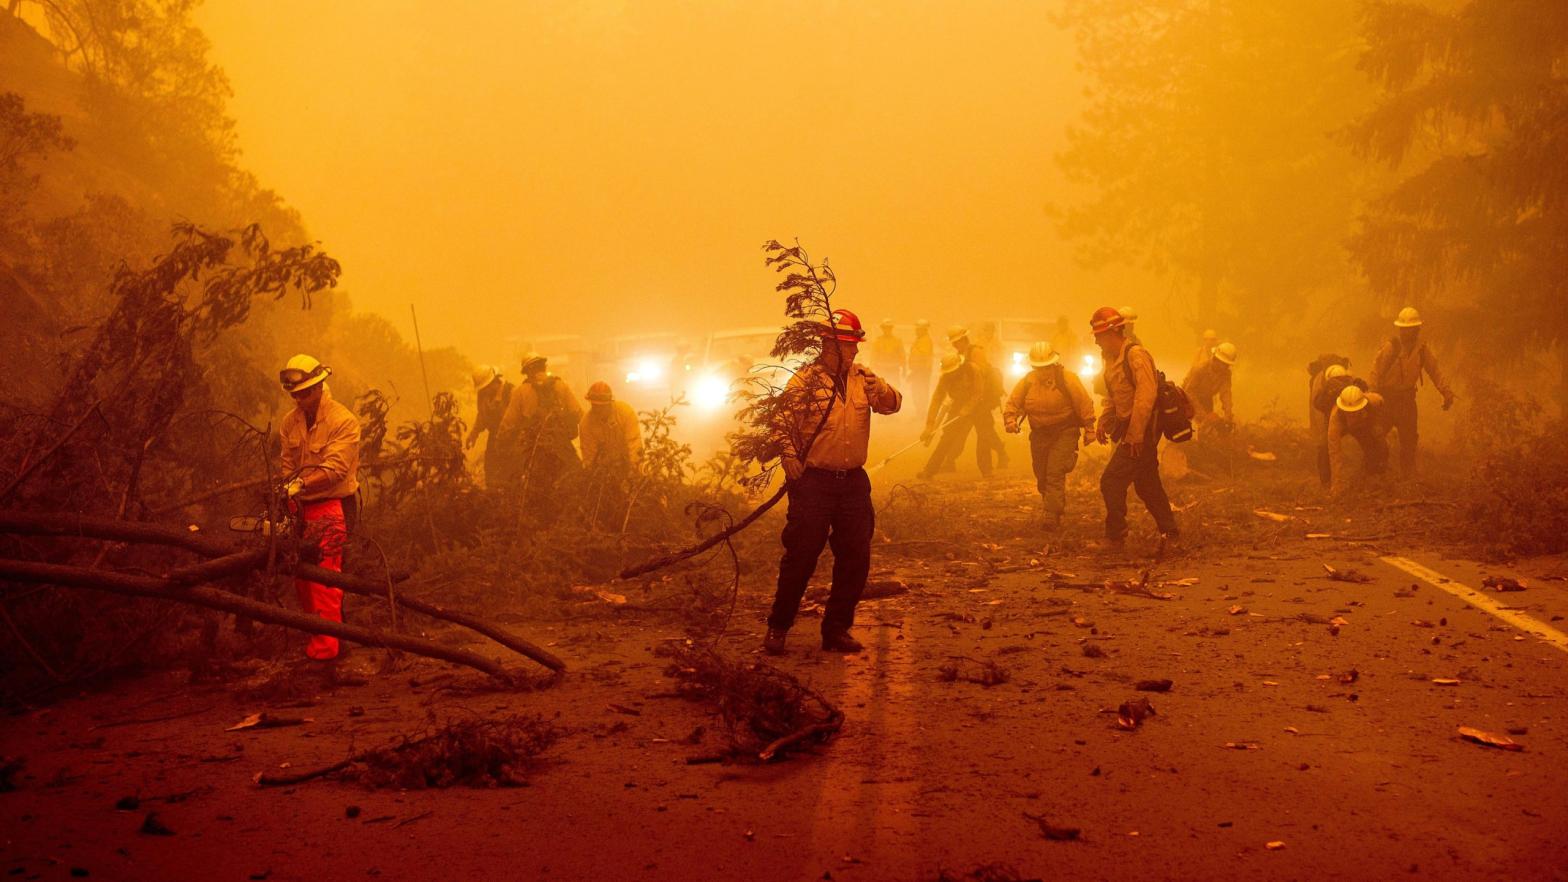 Firefighters battling the Dixie Fire clear Highway 89 after a burned tree fell across the roadway in Plumas County. (Photo: Noah Berger, AP)